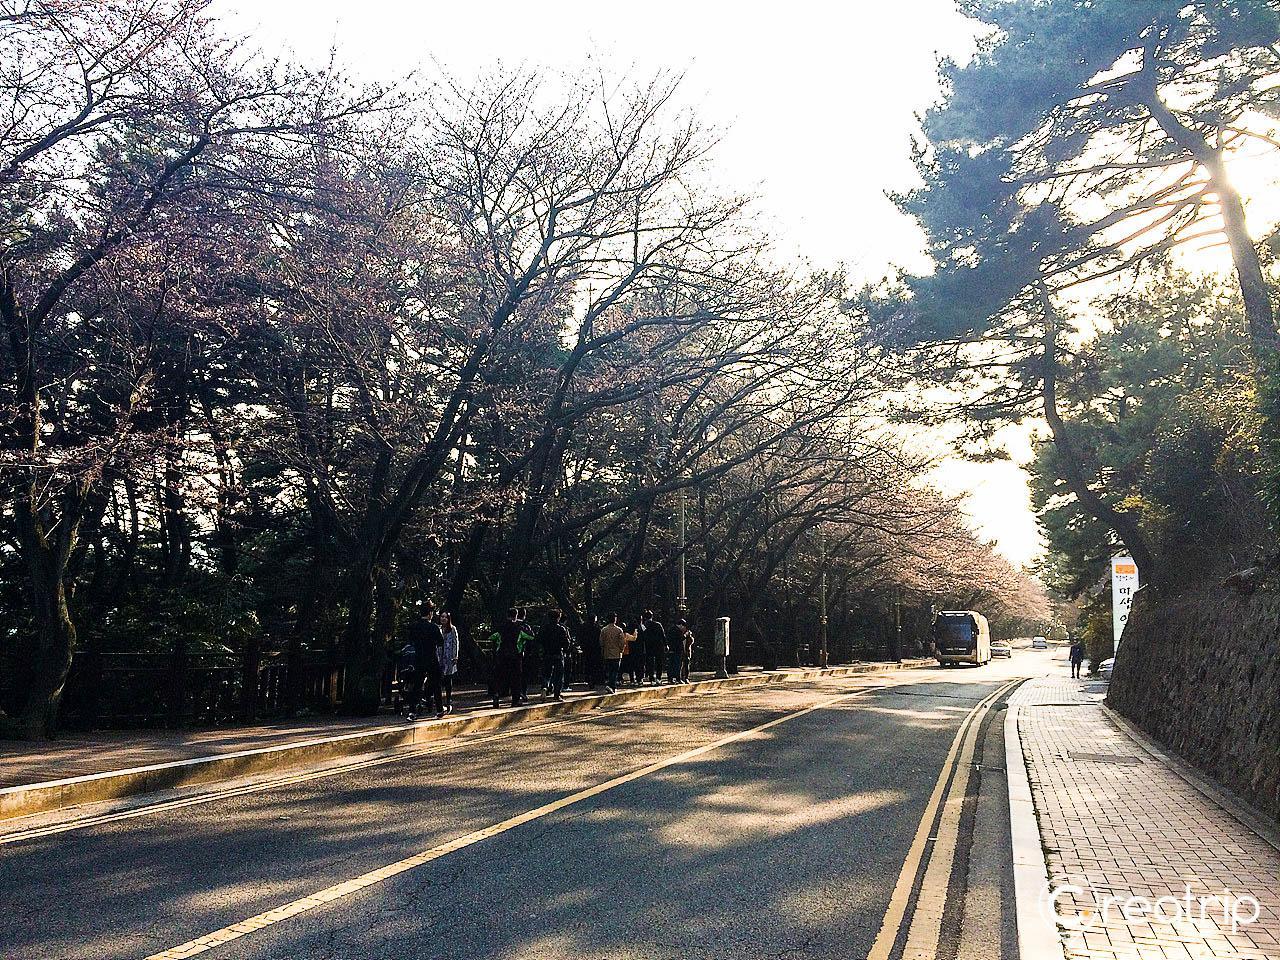 Scenic road with tree-lined path leading through natural landscape in Busan, South Korea